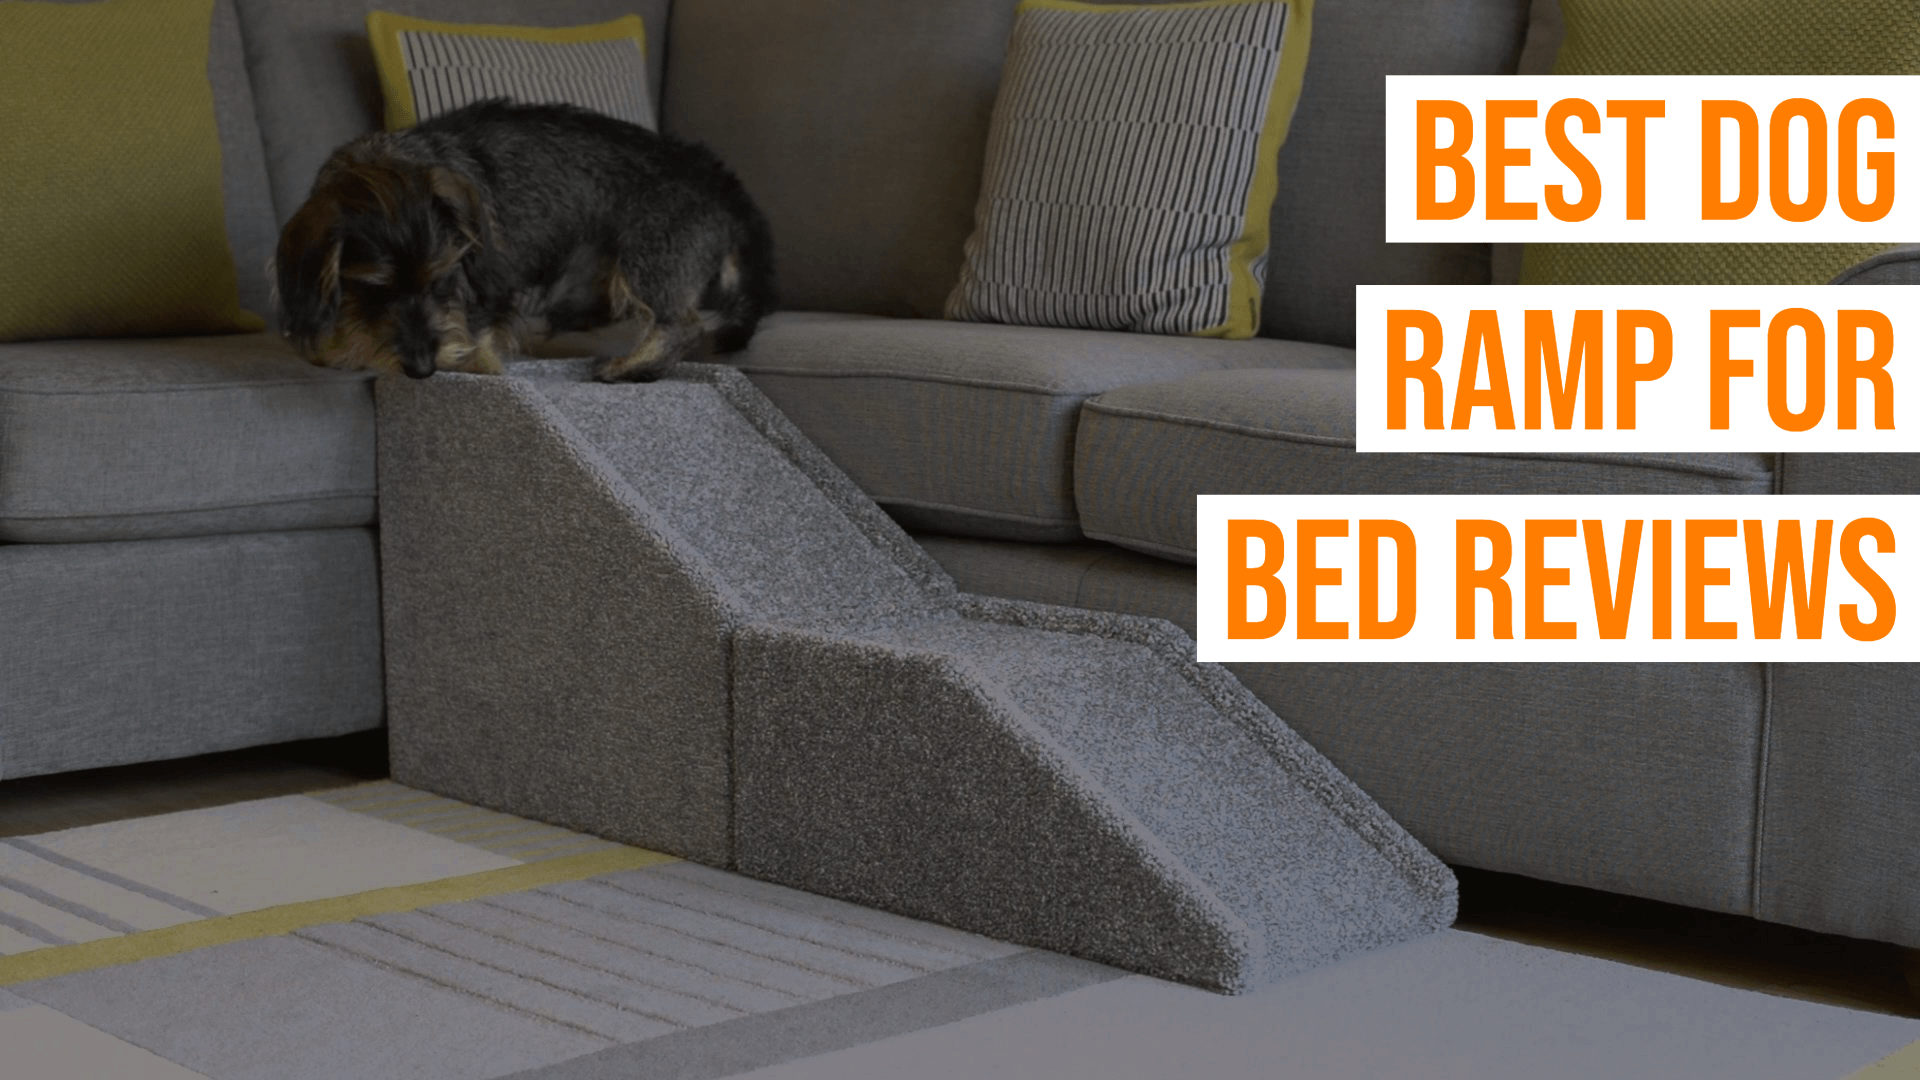 Best Dog Ramp For Bed Reviews